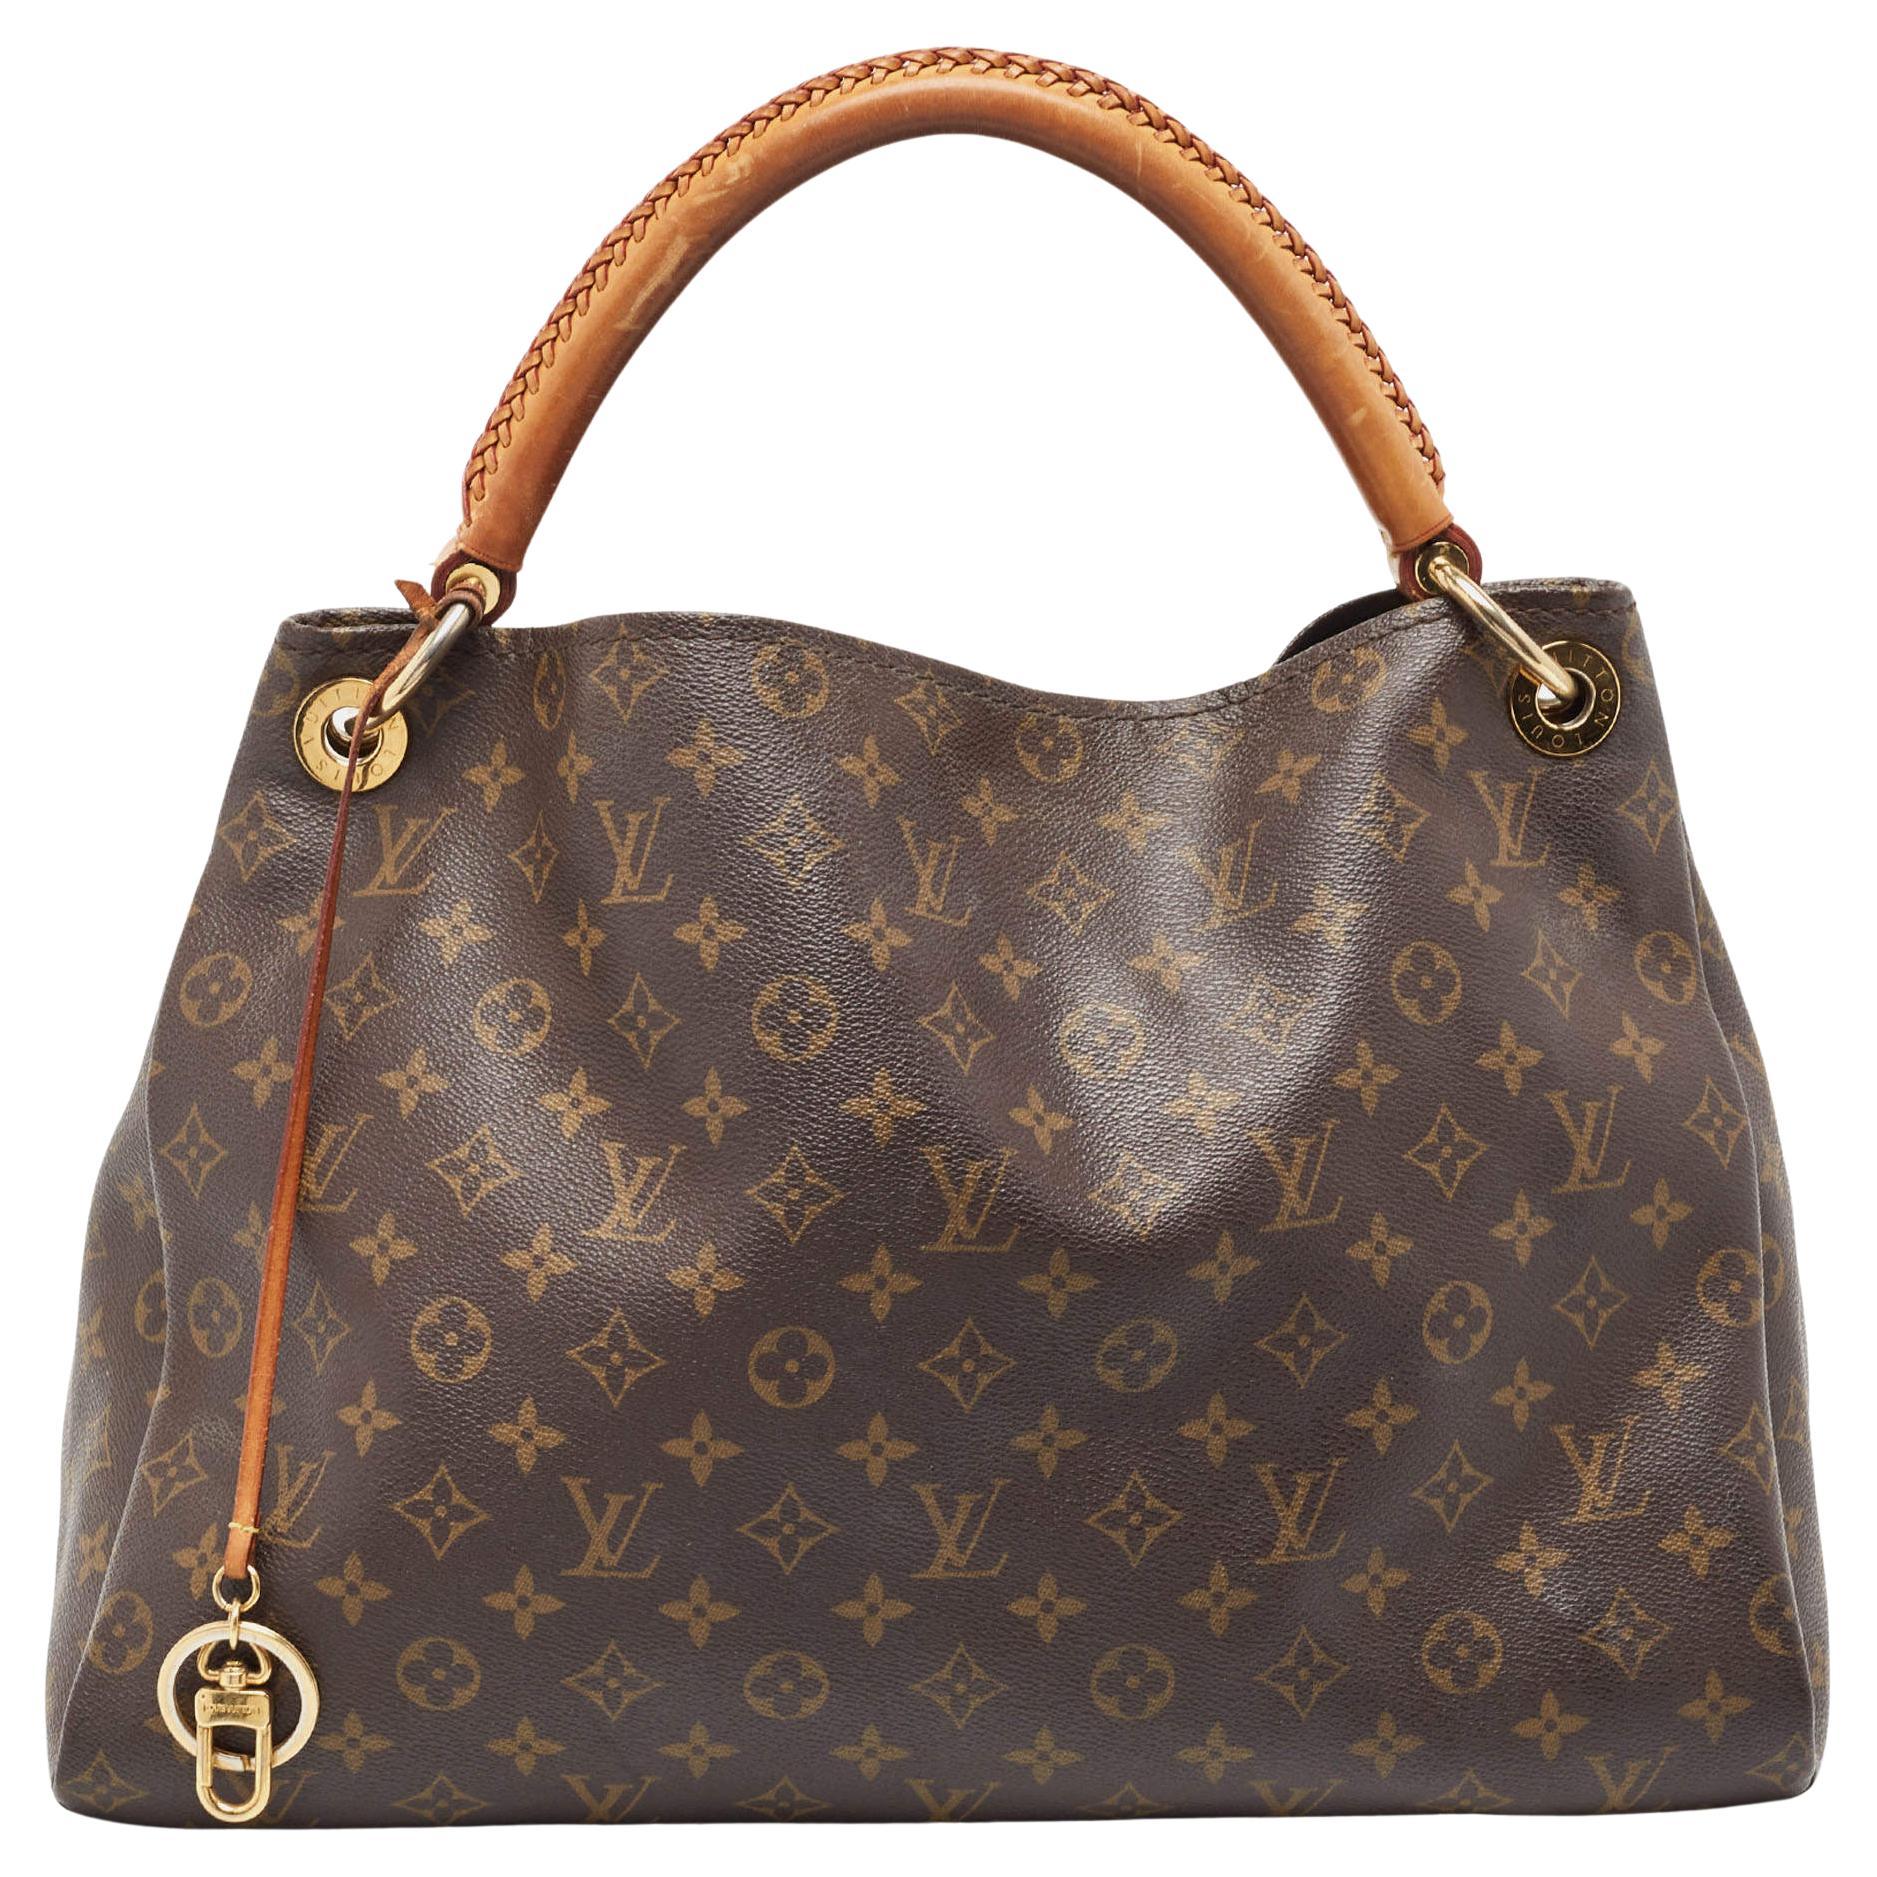 What size is the Louis Vuitton Artsy bag?